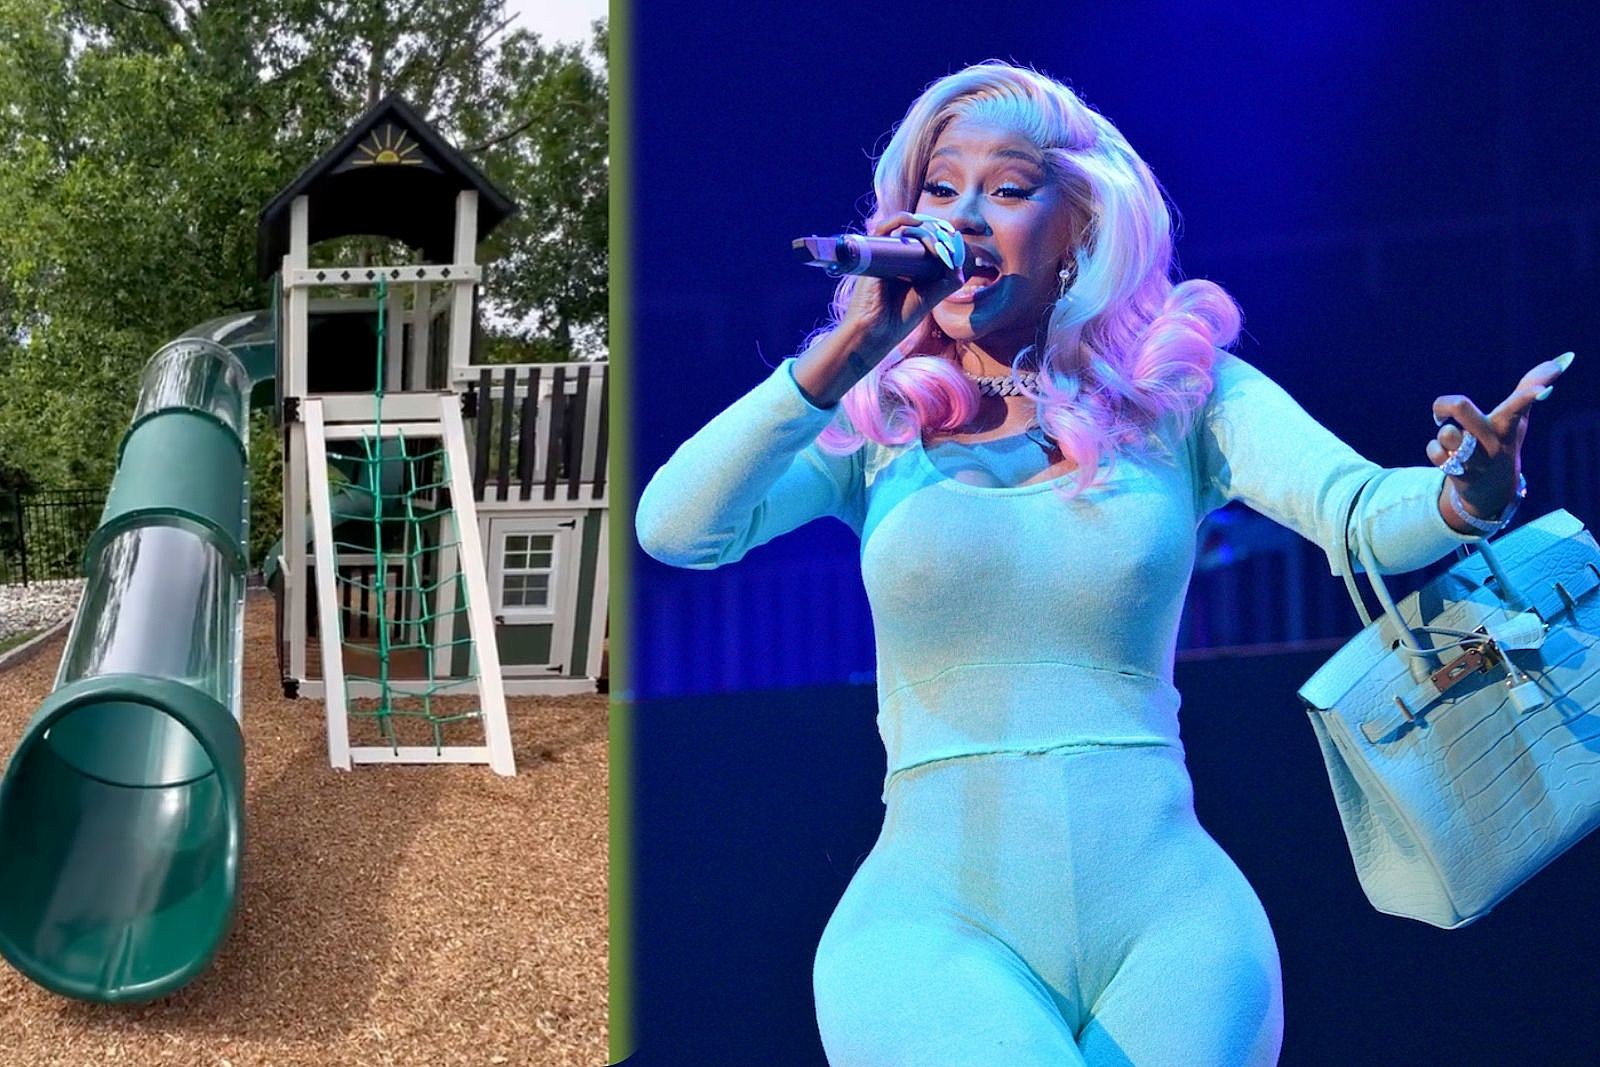 Where To Buy The $20k Playground Cardi B Just Built For Her Kids image picture